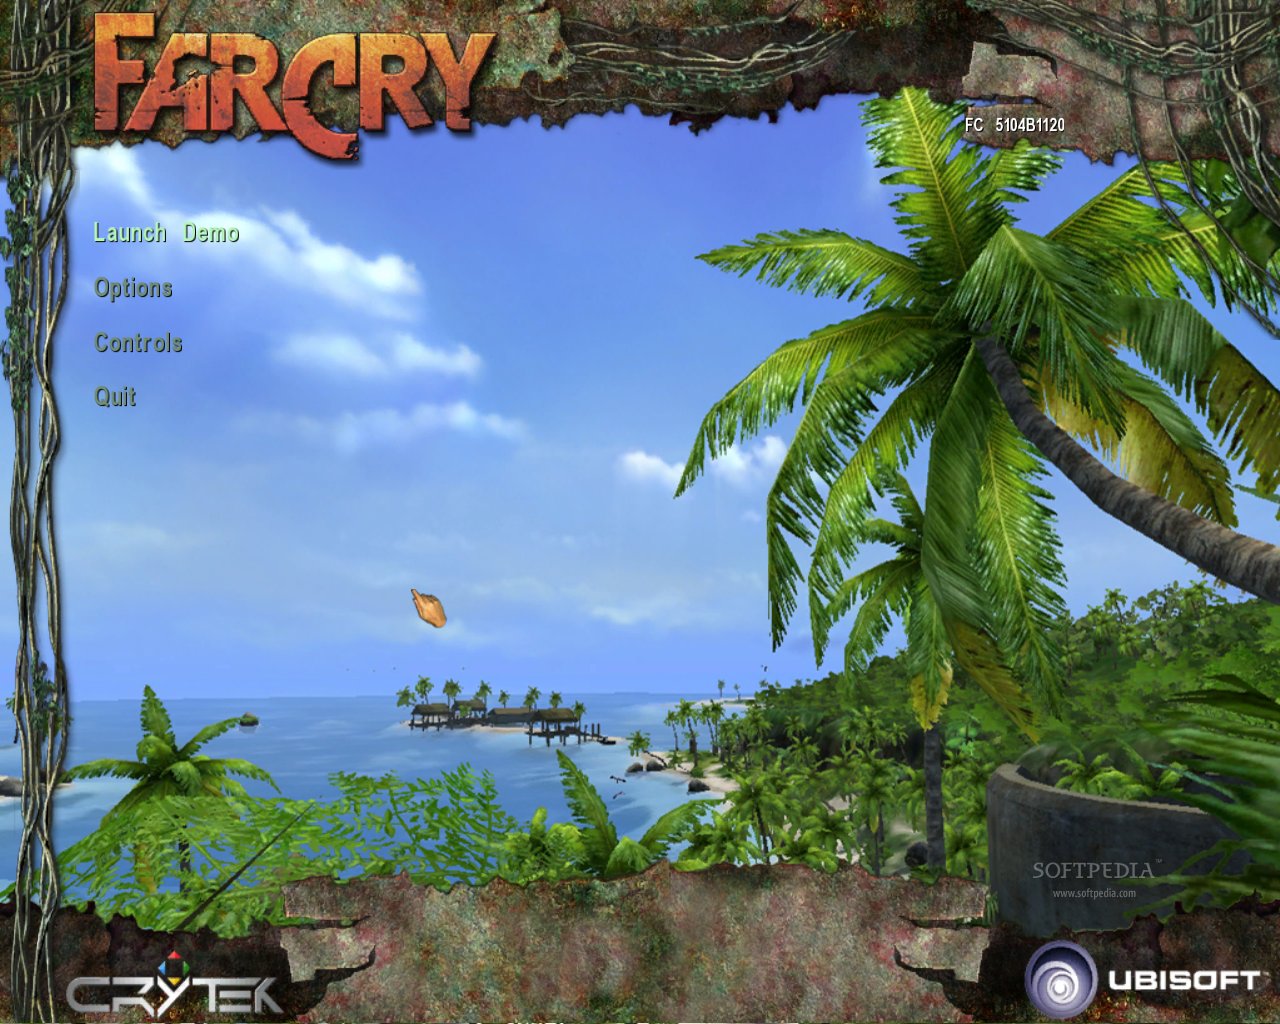 far cry 1 pc game download